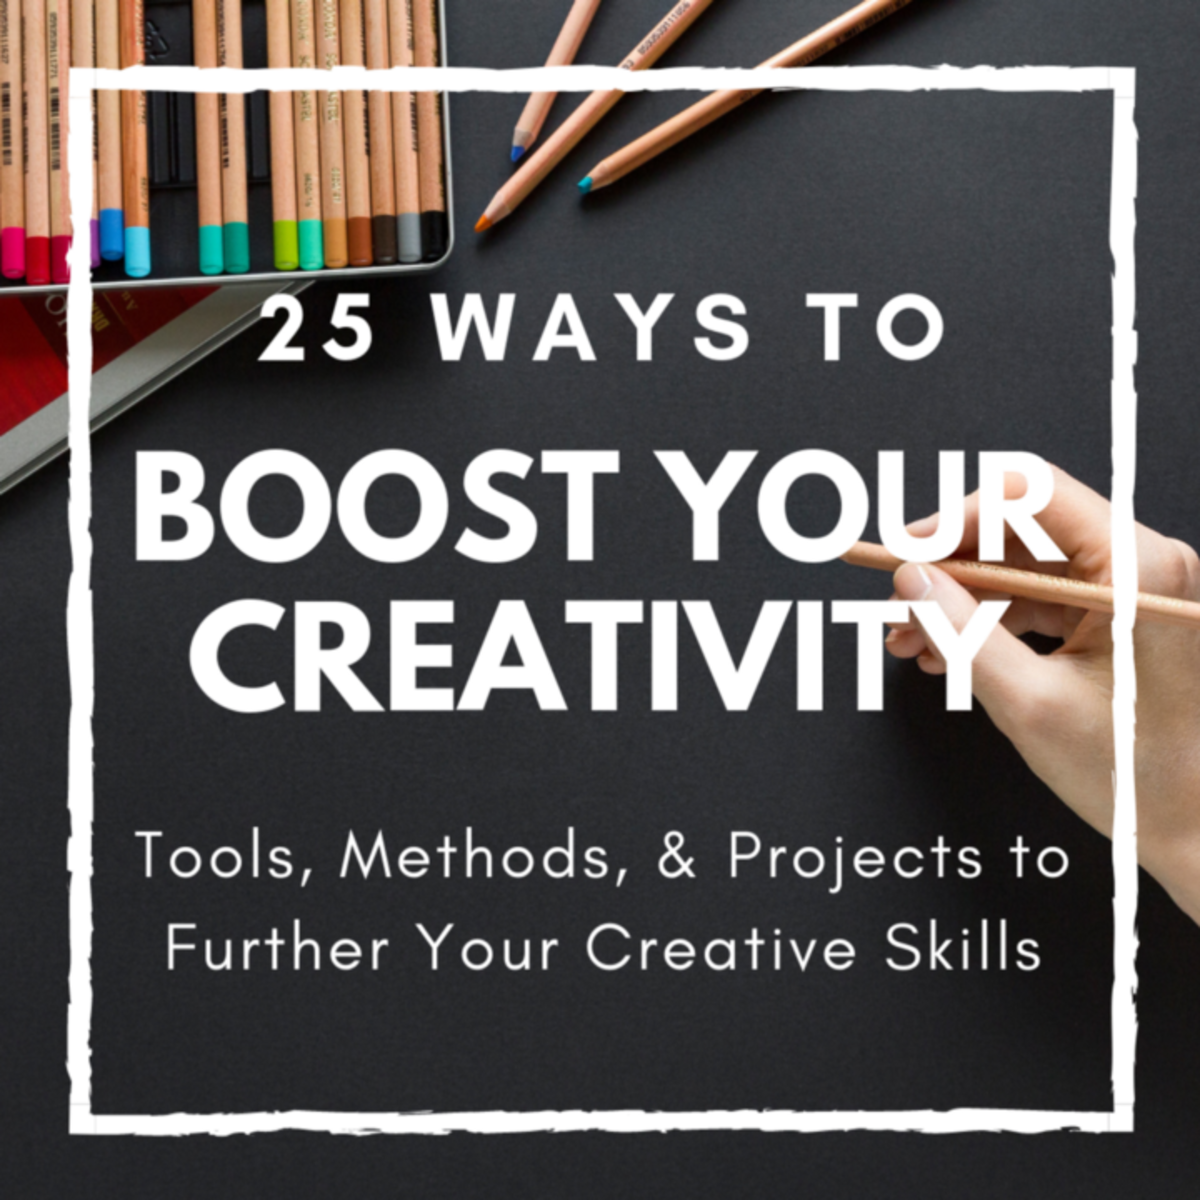 These tips will help you increase your creative output